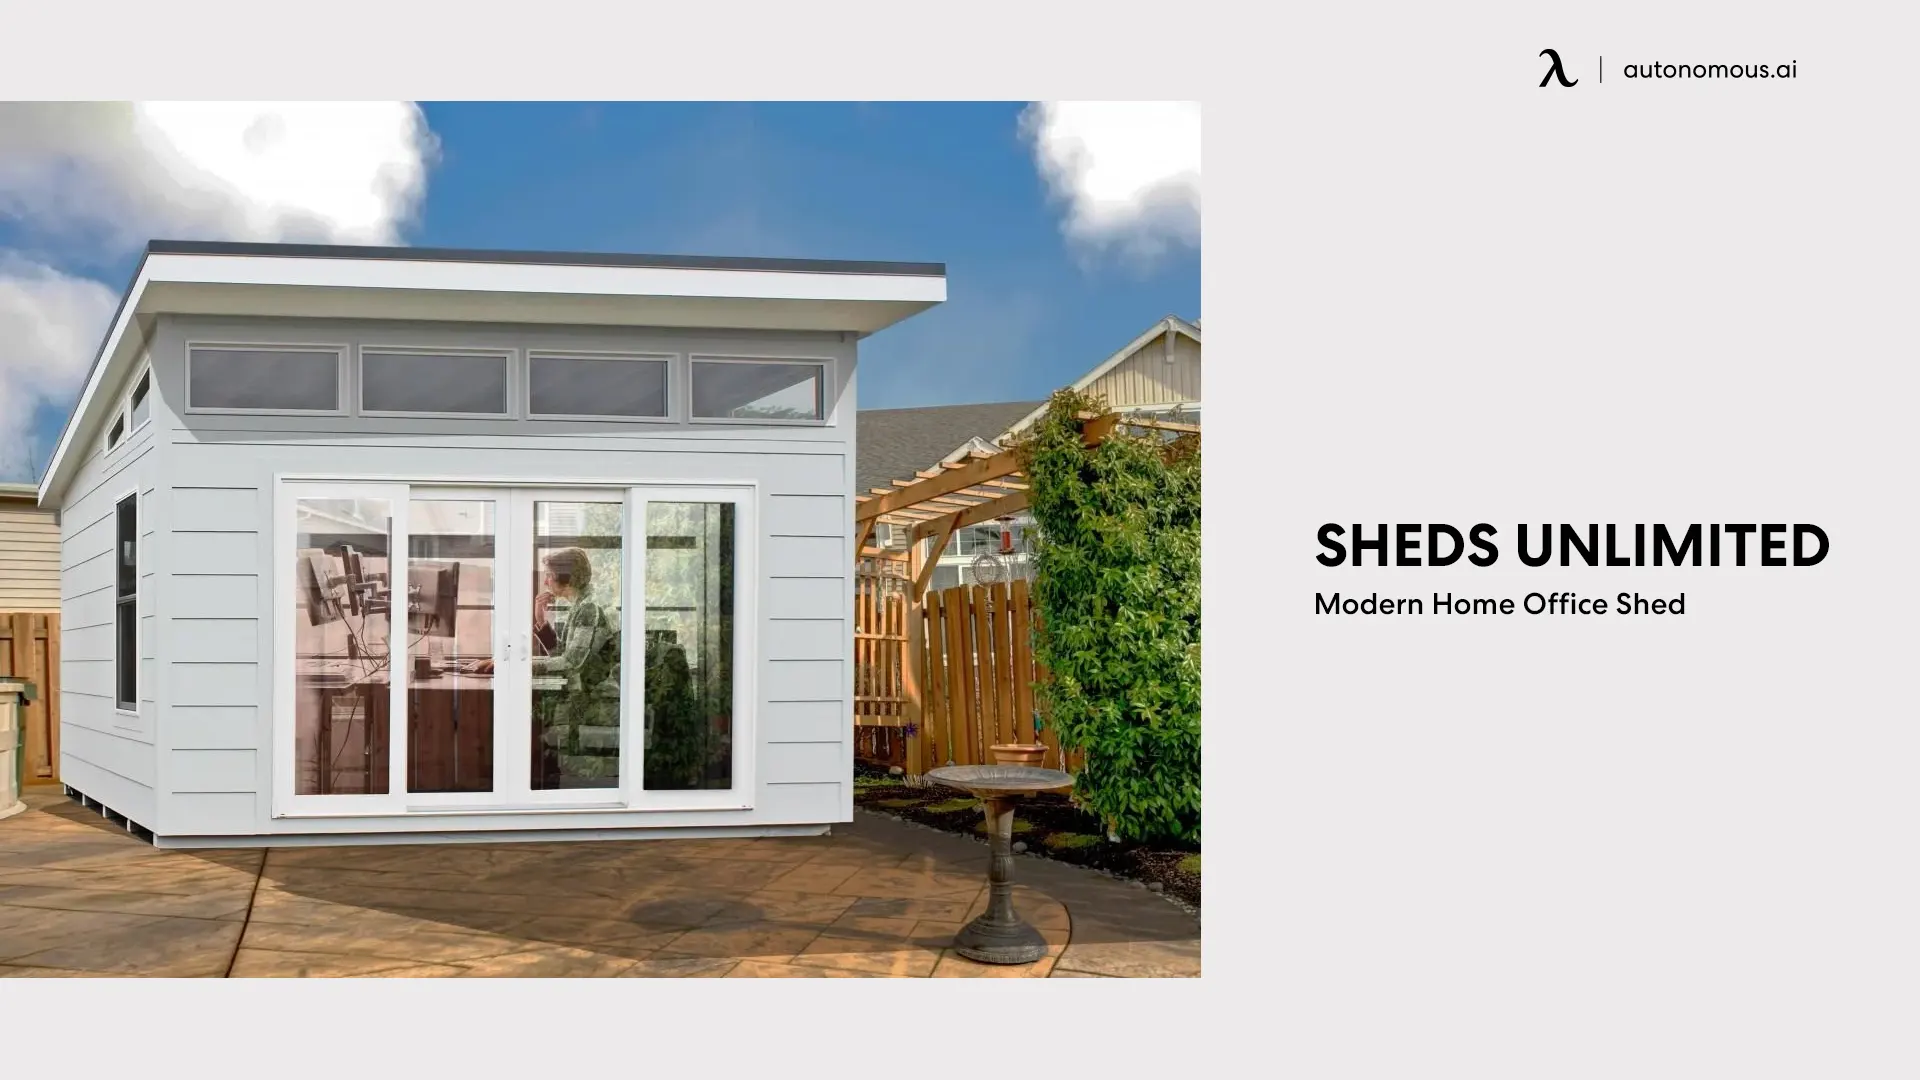 Sheds Unlimited Modern Home Office Shed